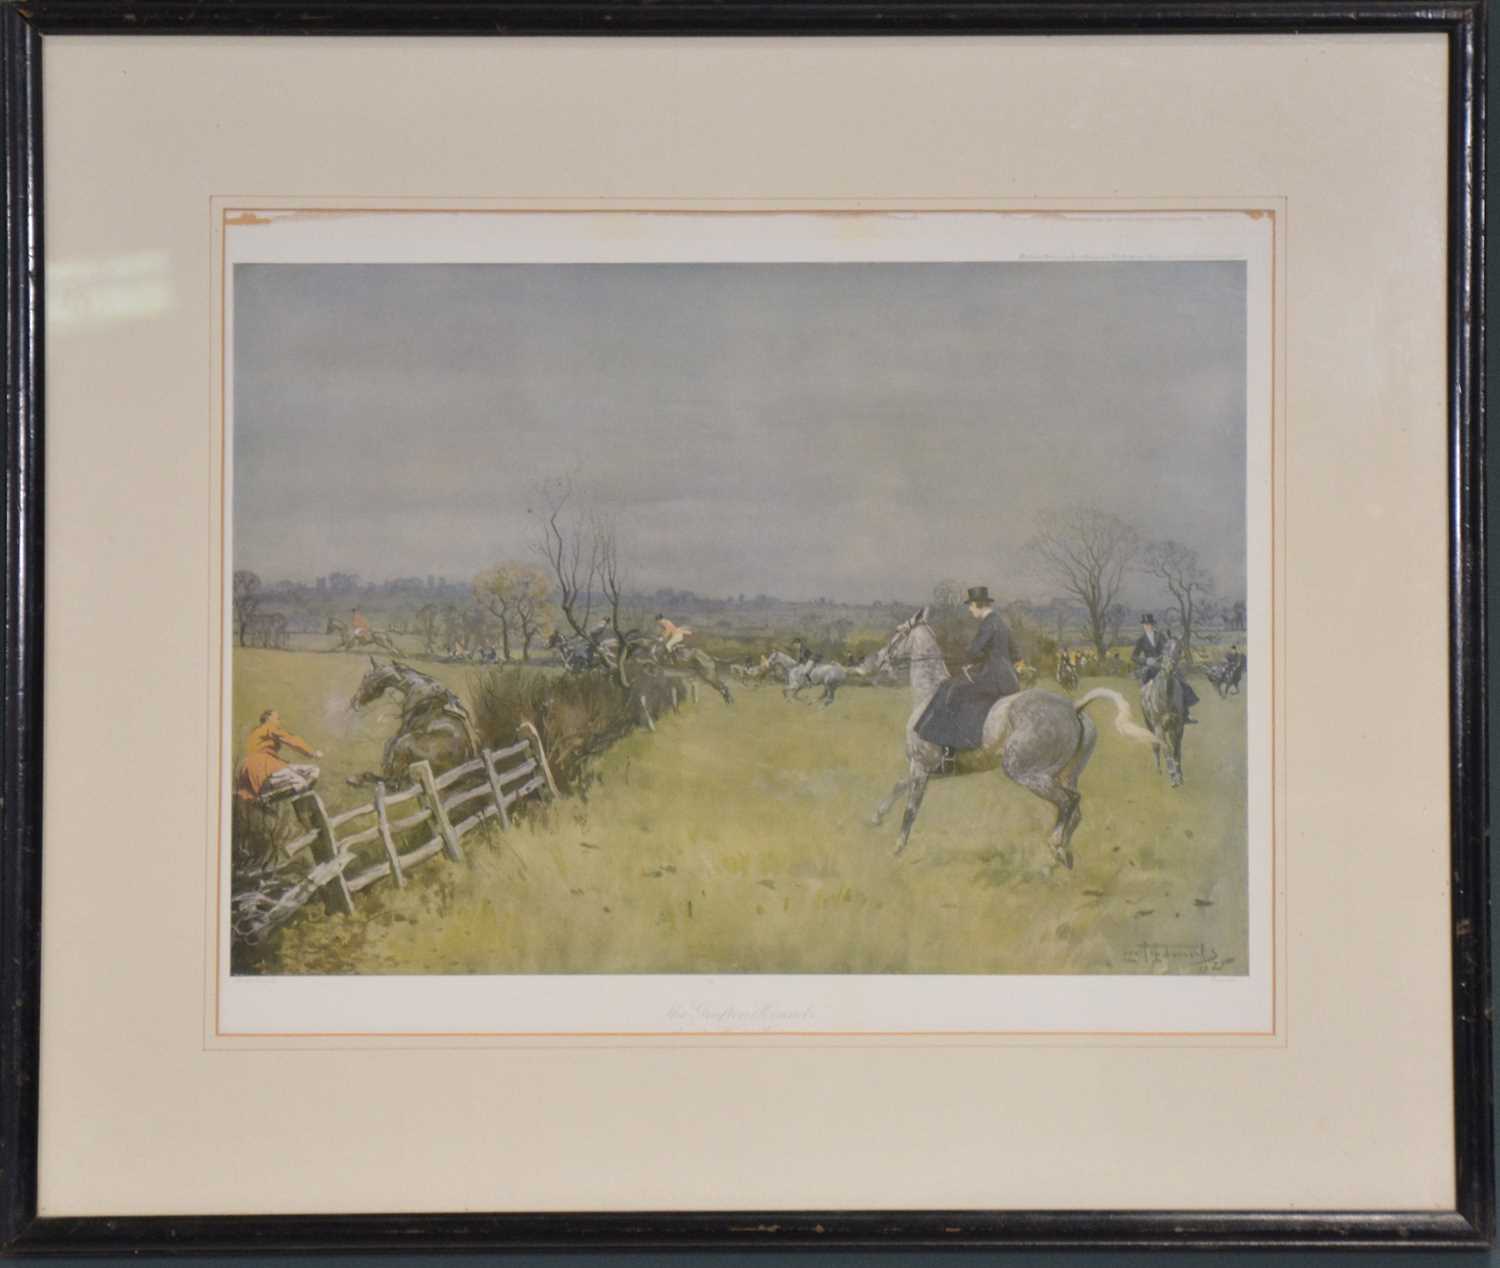 After Lionel Edwards, Hunting Countries - The Cotswold and The Waddon Chase, and other prints. - Image 8 of 14